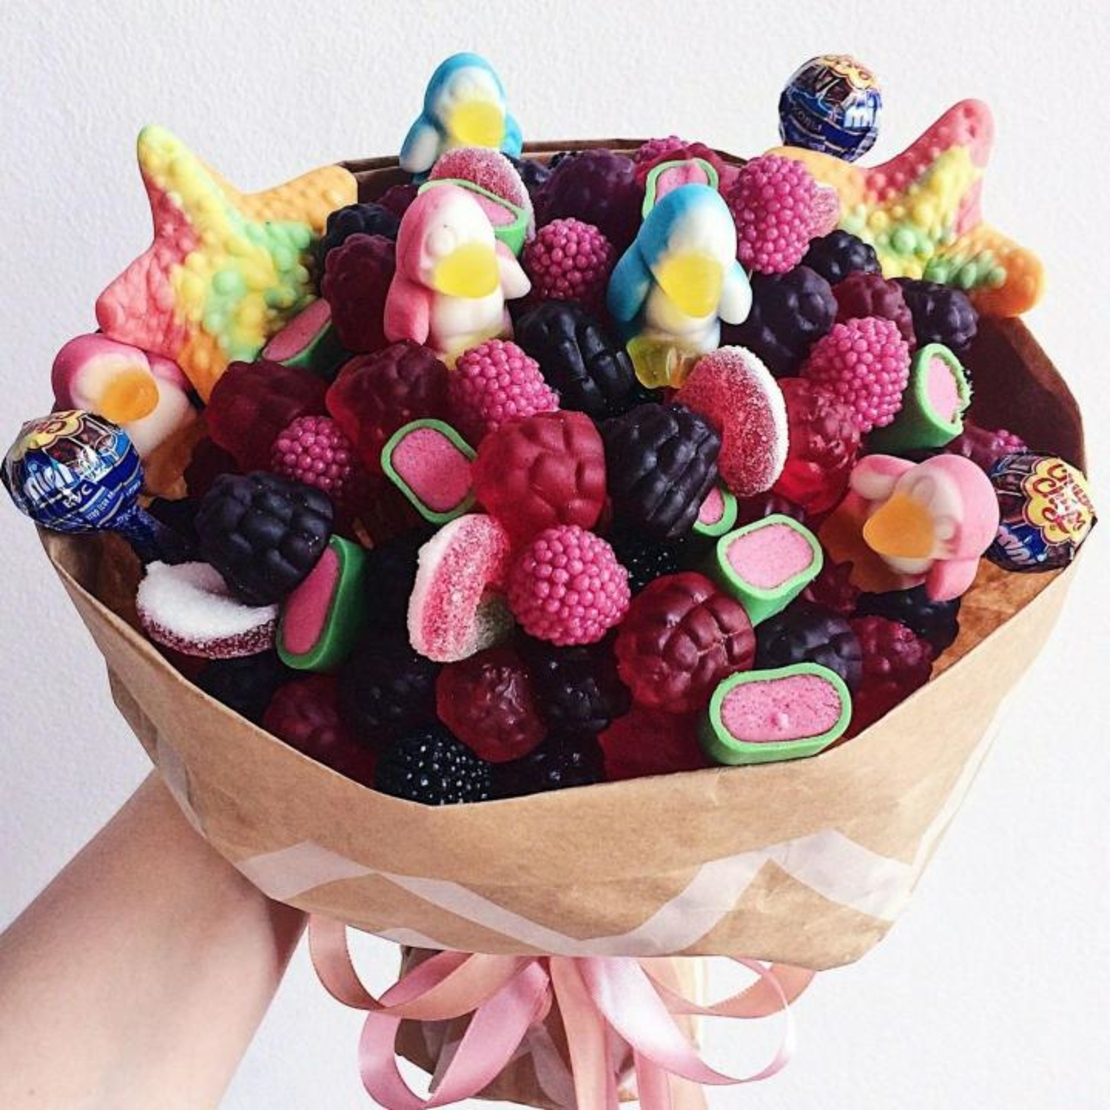 A sweet bouquet from gummy candies